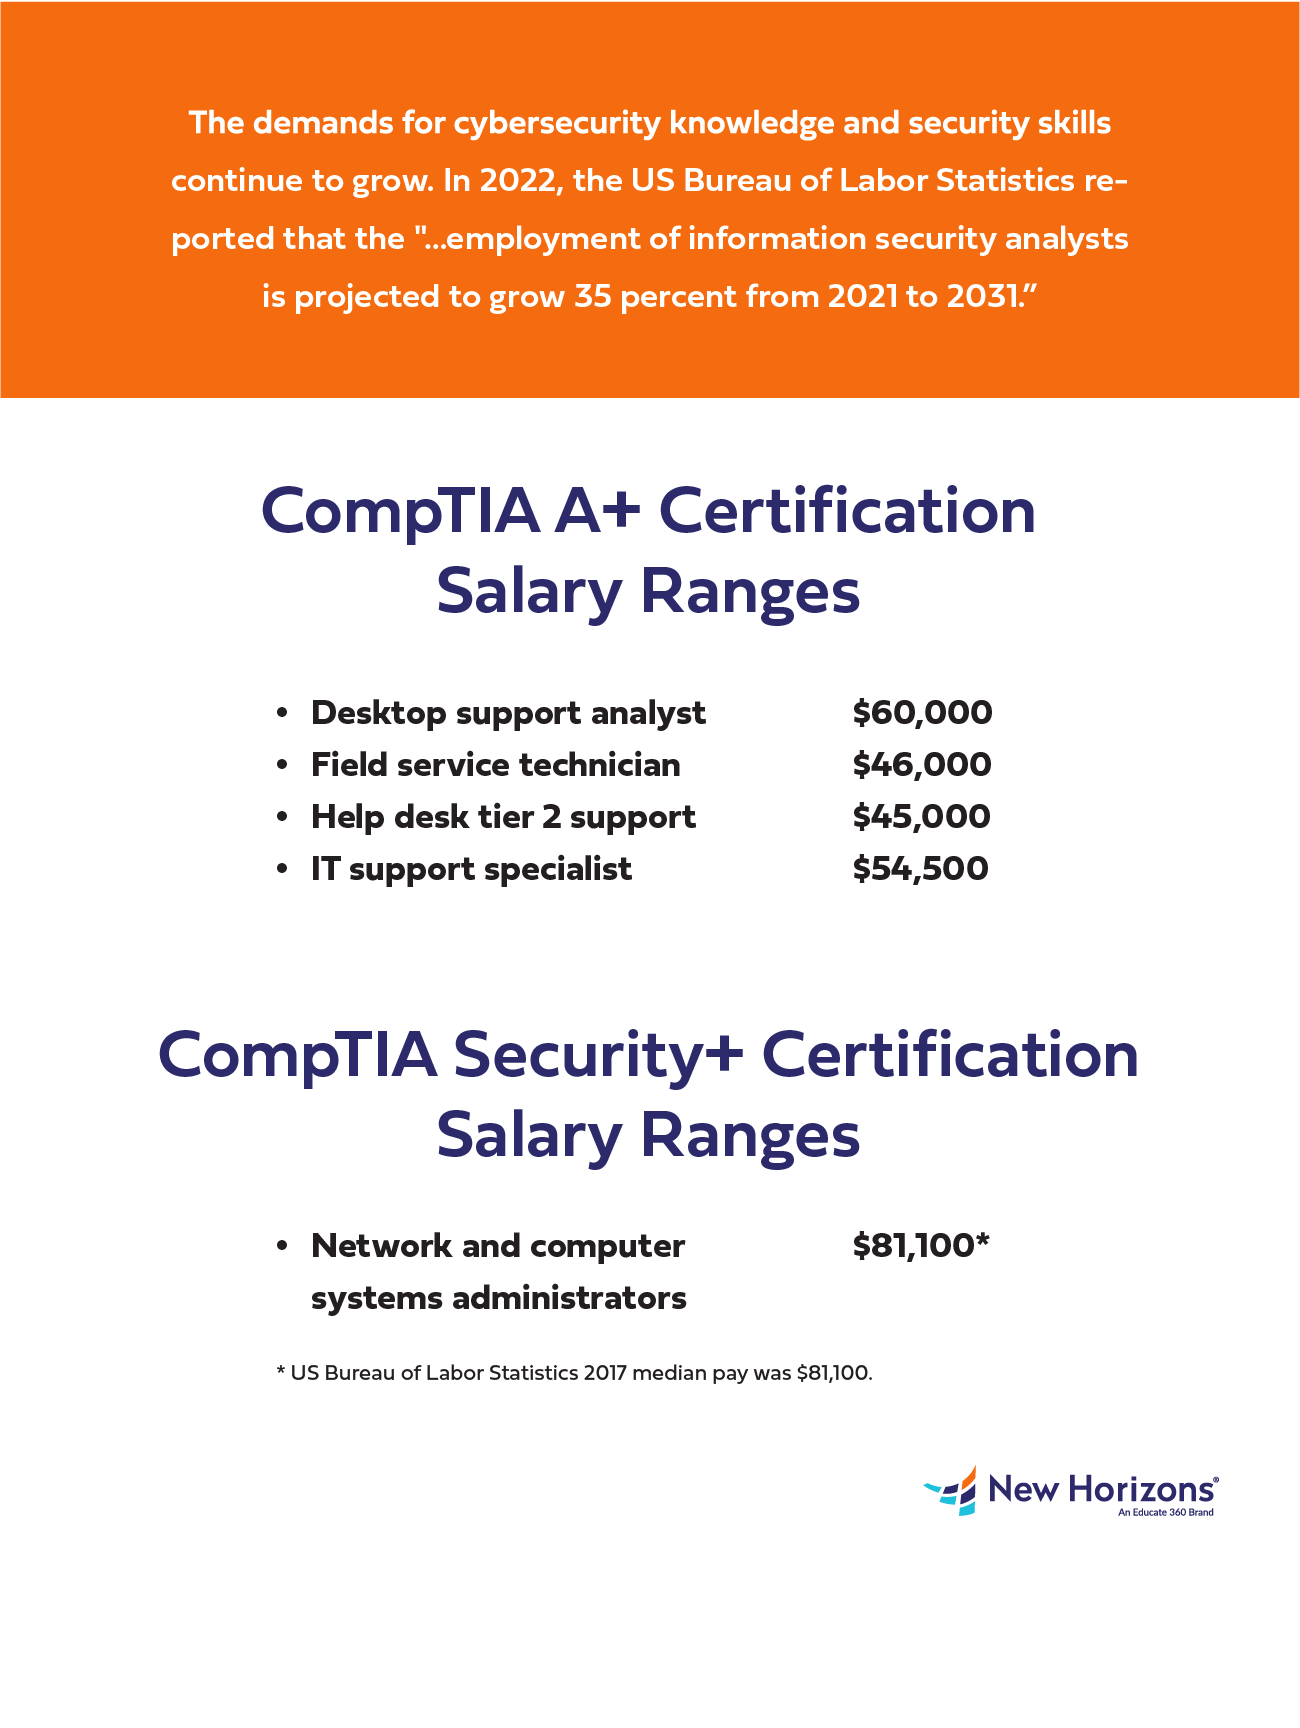 CompTIA A+ vs. Security+ Certifications Which is Right for You?